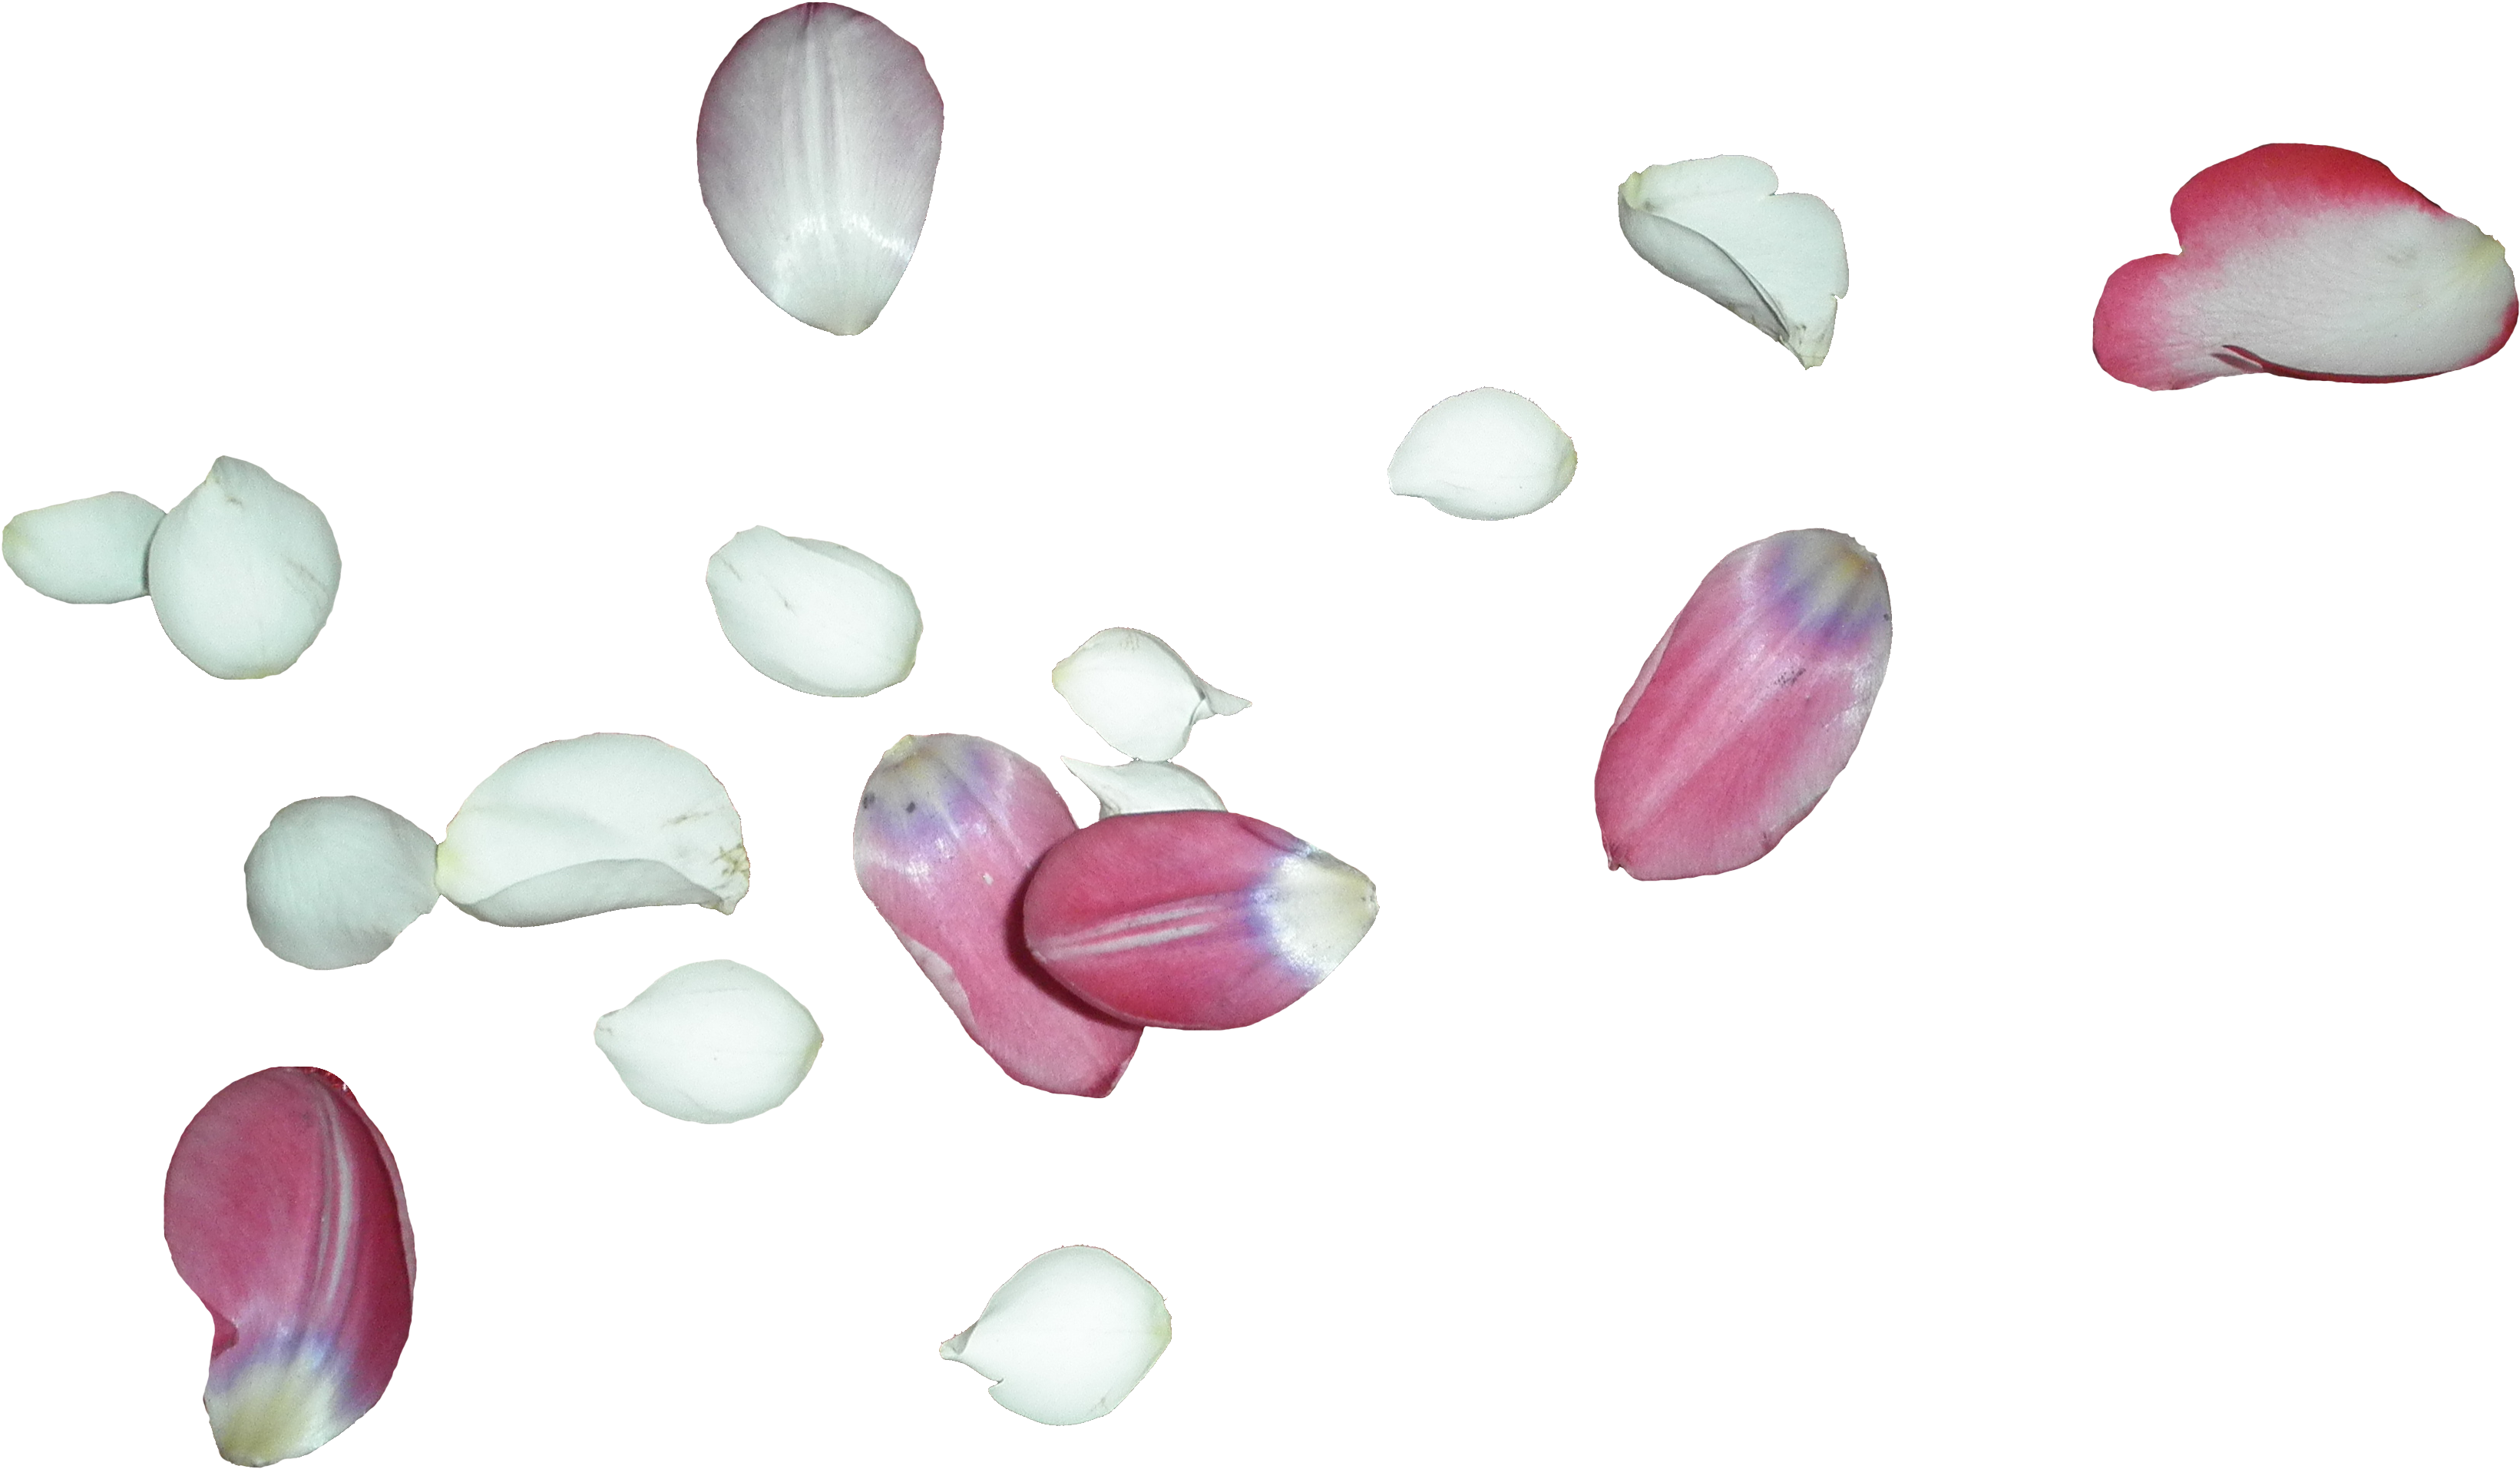 A Group Of Petals On A Black Background